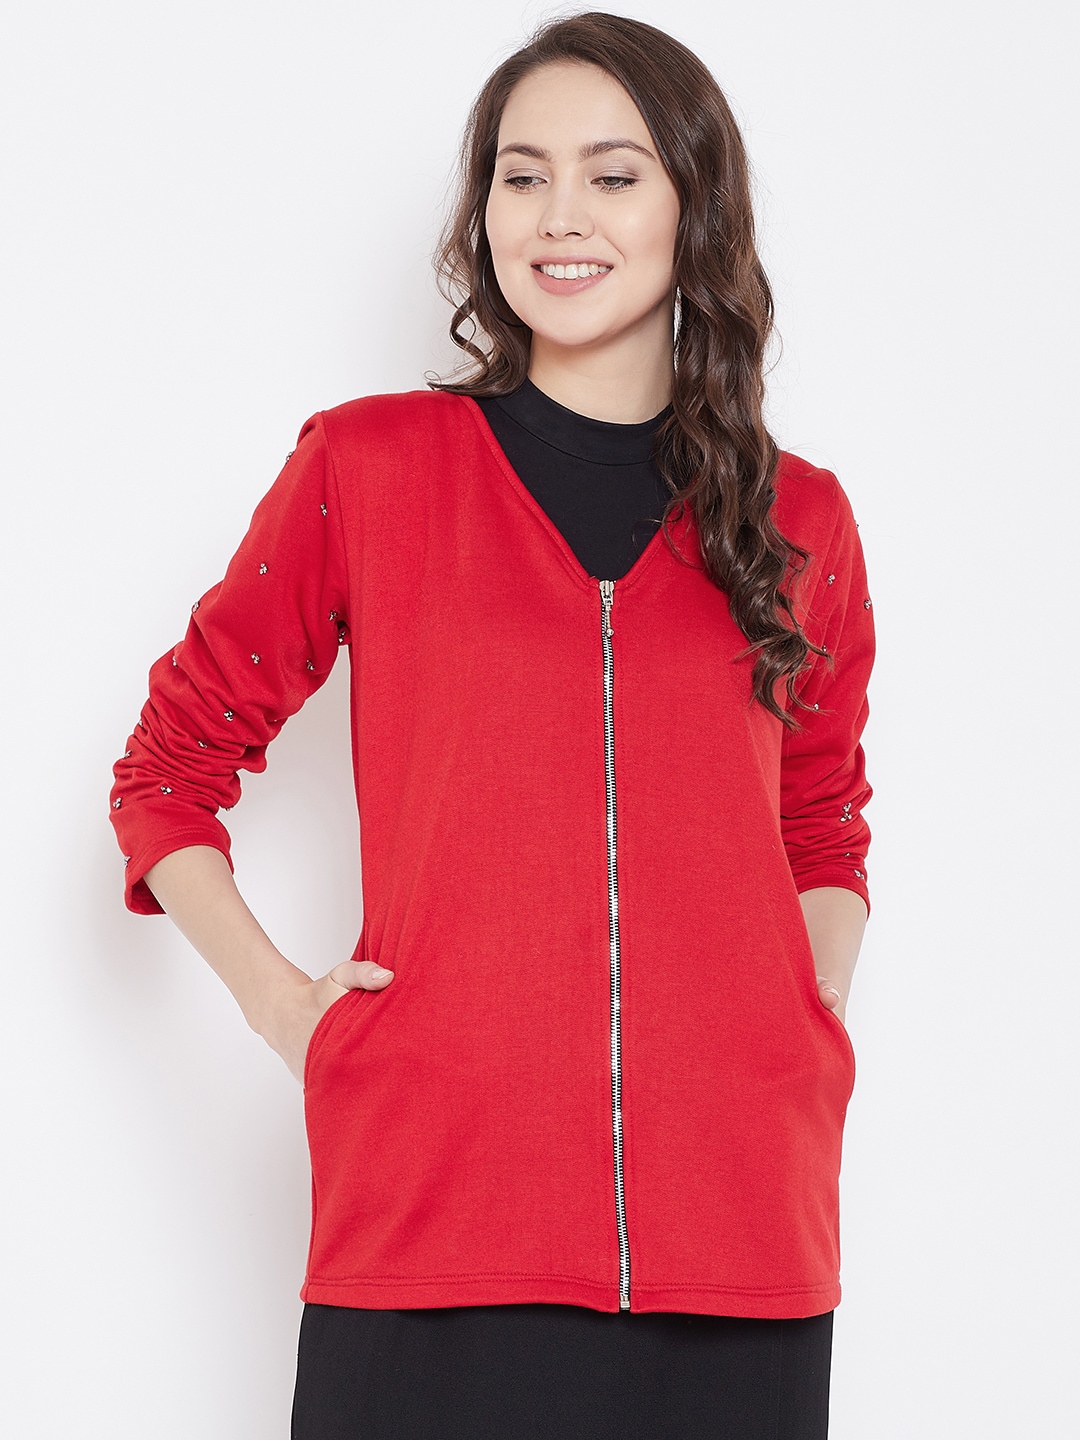 Belle Fille Women Red Solid Tailored Jacket Price in India